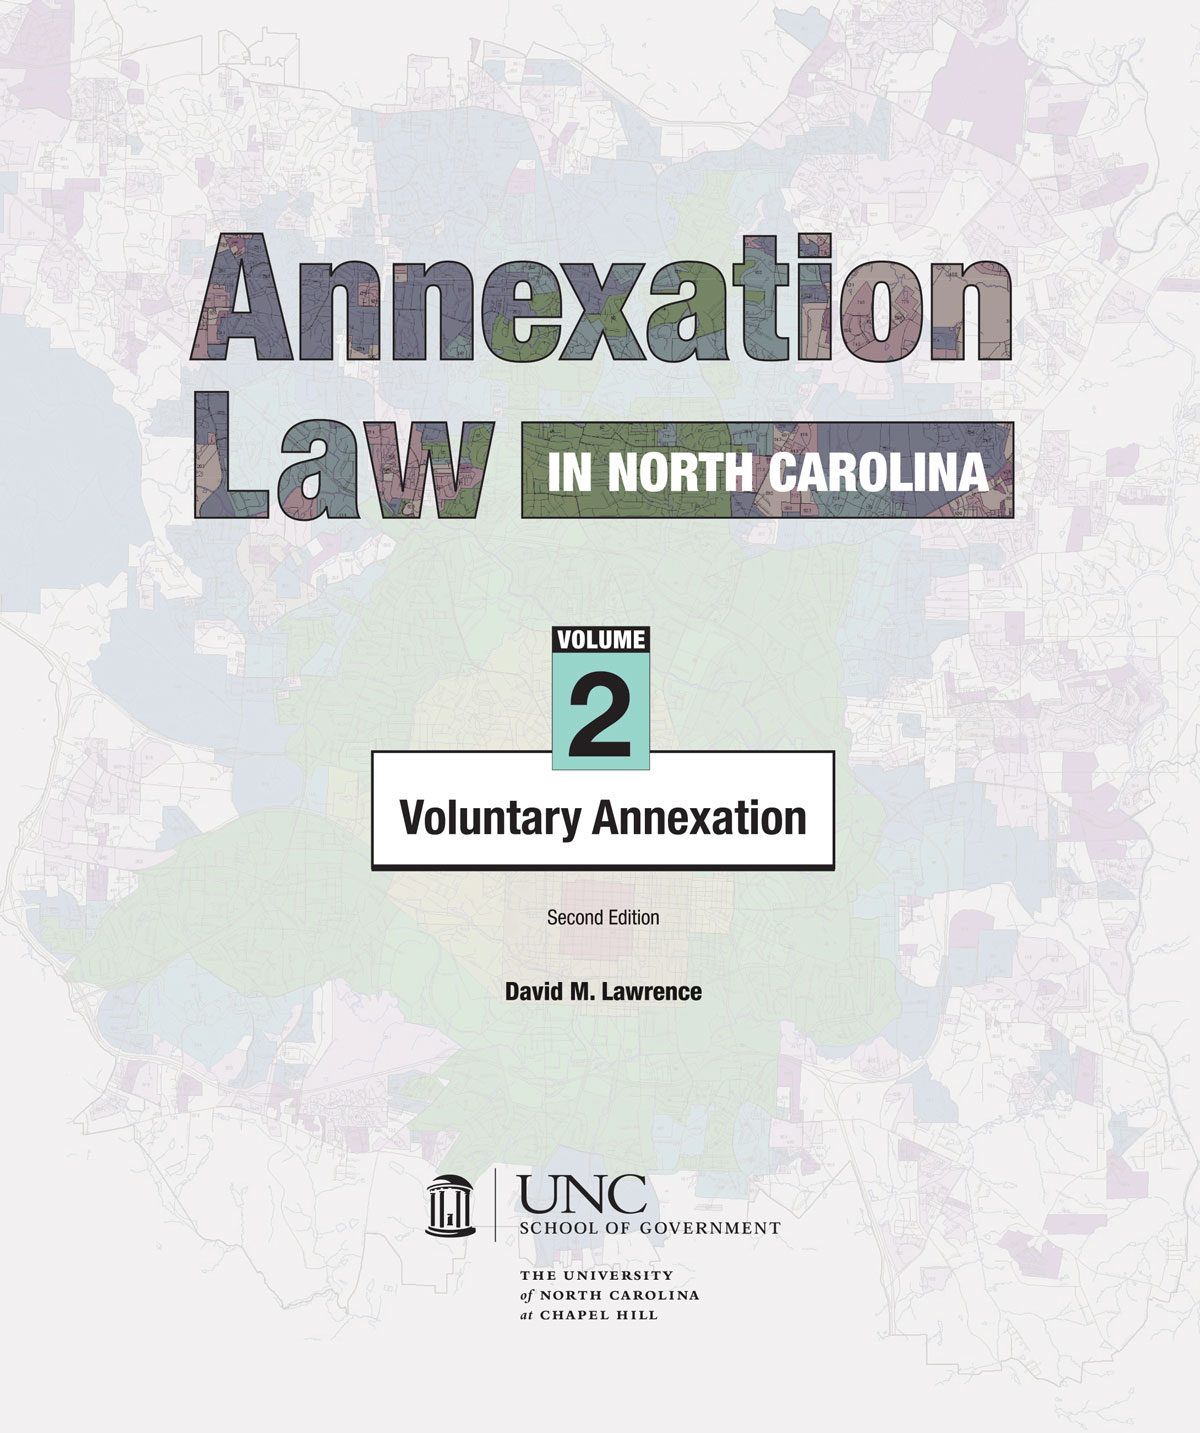 Cover image for Annexation Law in North Carolina: Volume 2 - Voluntary Annexation